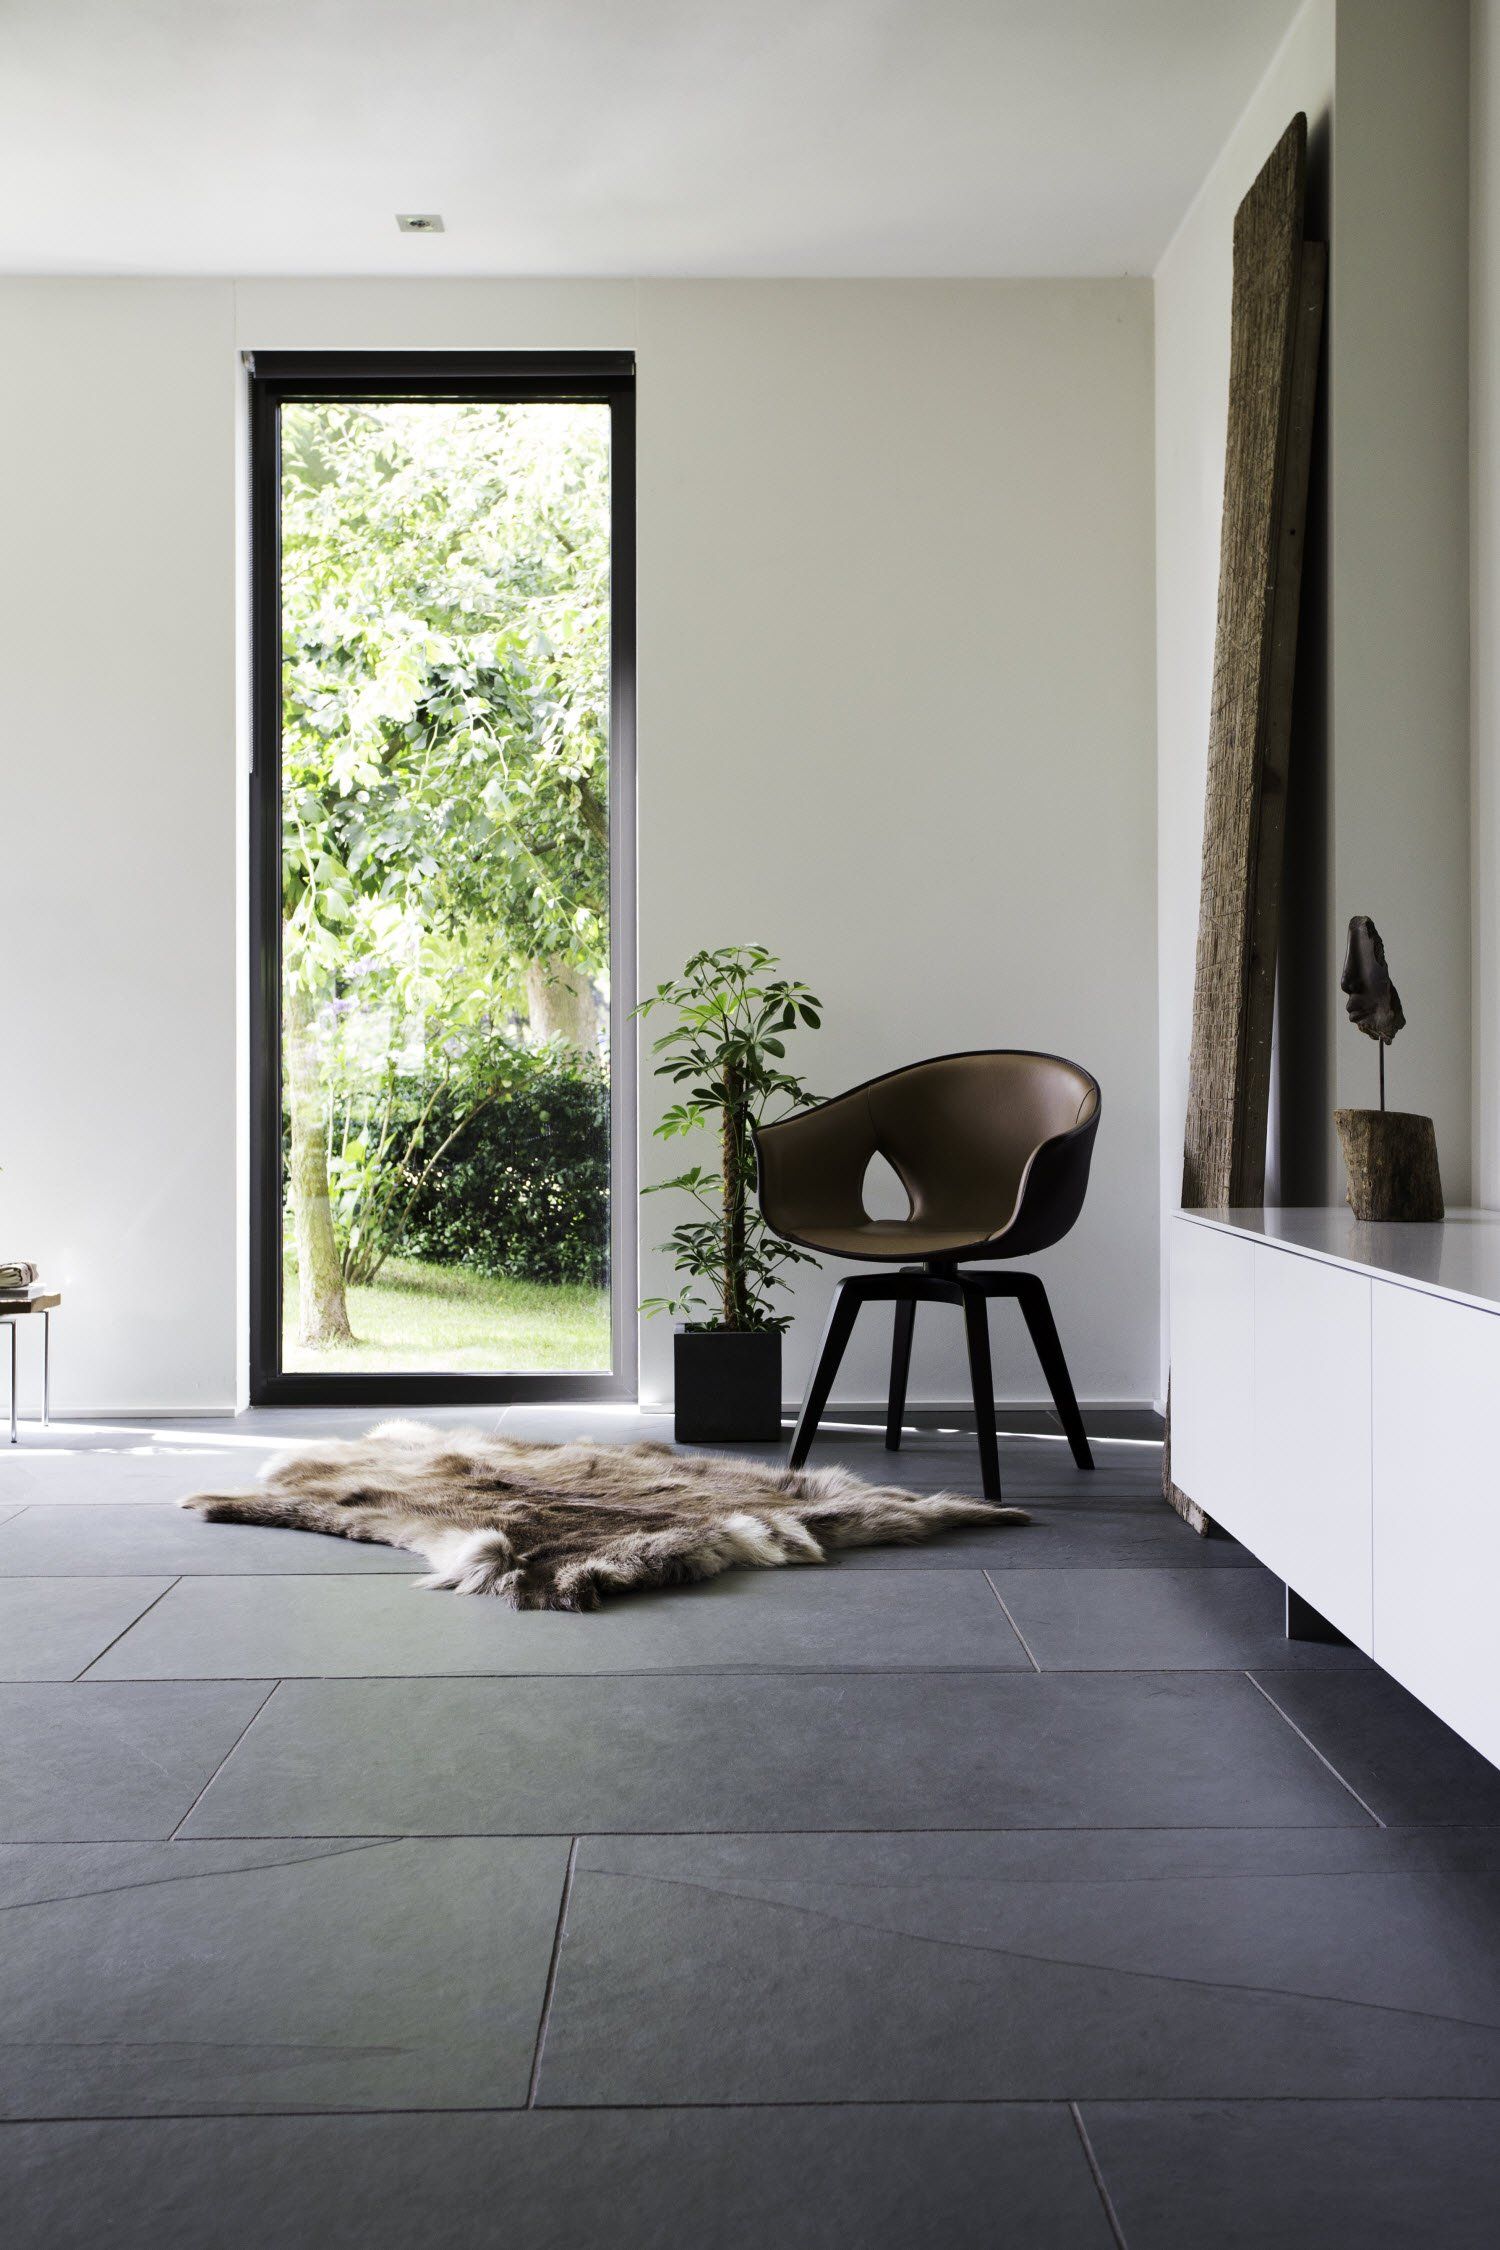 How to look after your slate flooring